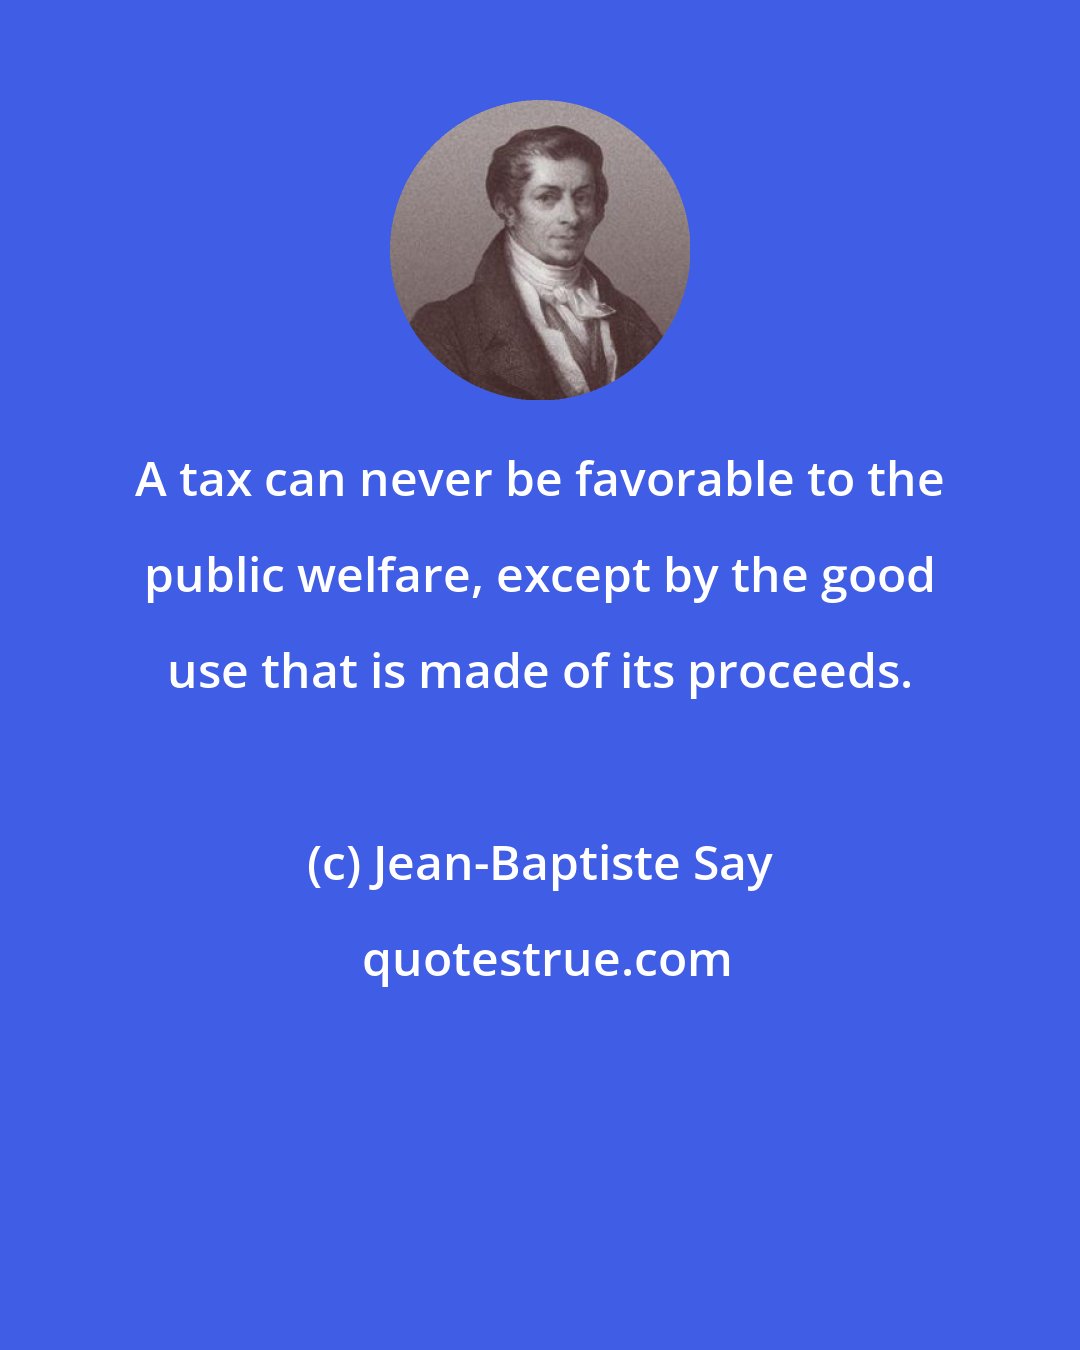 Jean-Baptiste Say: A tax can never be favorable to the public welfare, except by the good use that is made of its proceeds.